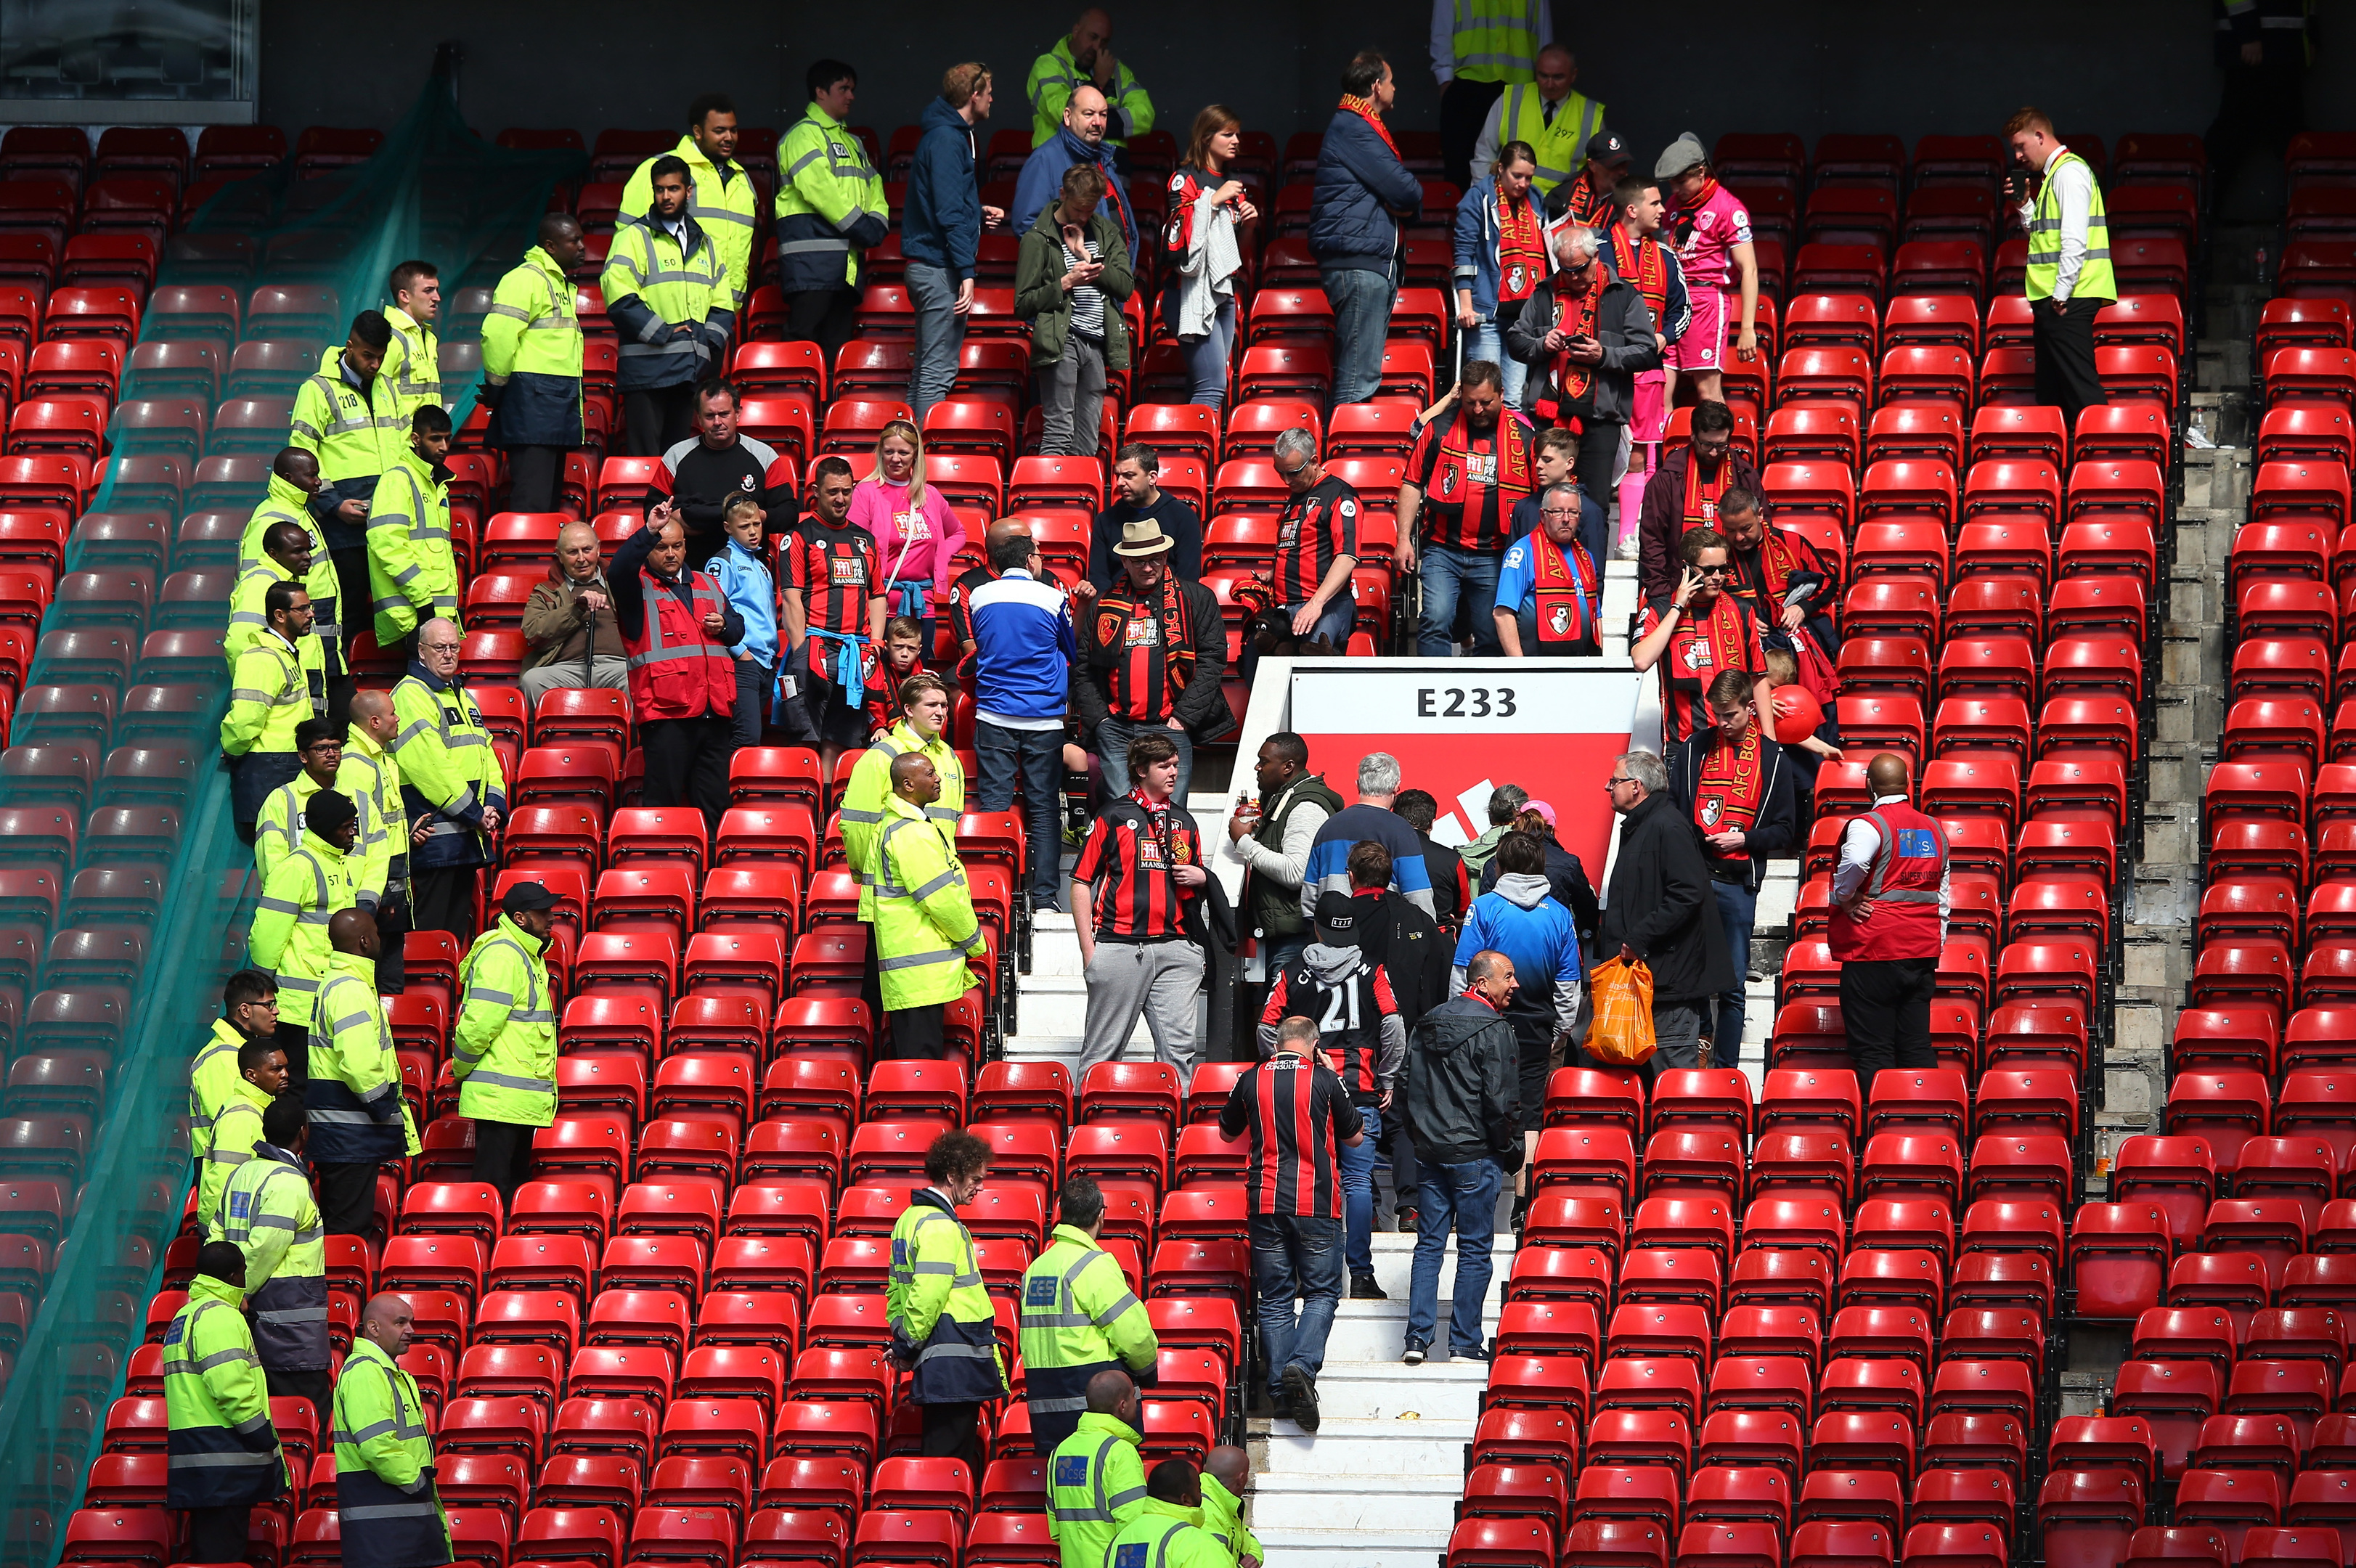 Fans being evacuated during the bomb scare.